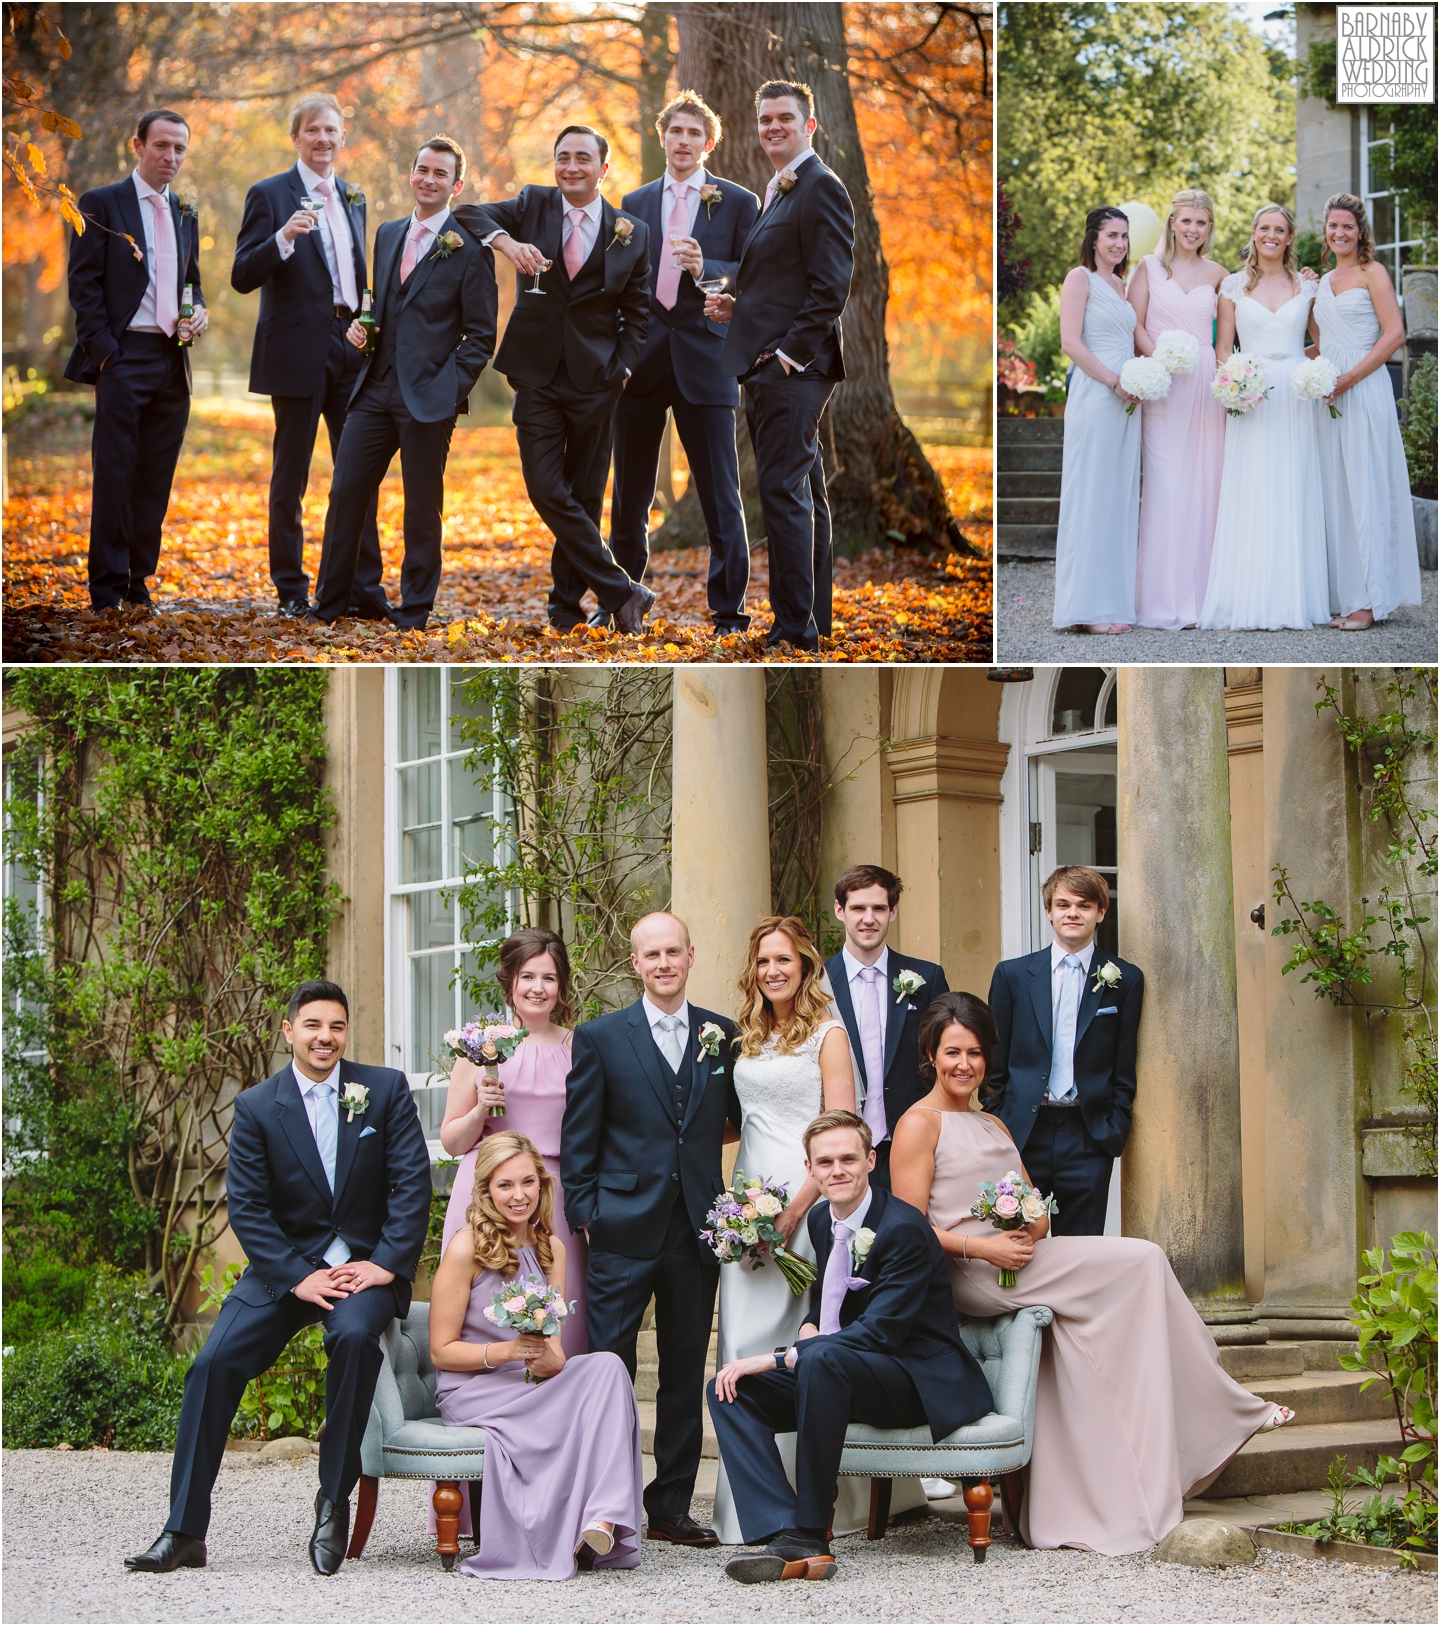 Funky group shots of the Bridesmaids and groomsmen at Middleton Lodge in Middleton Tyas